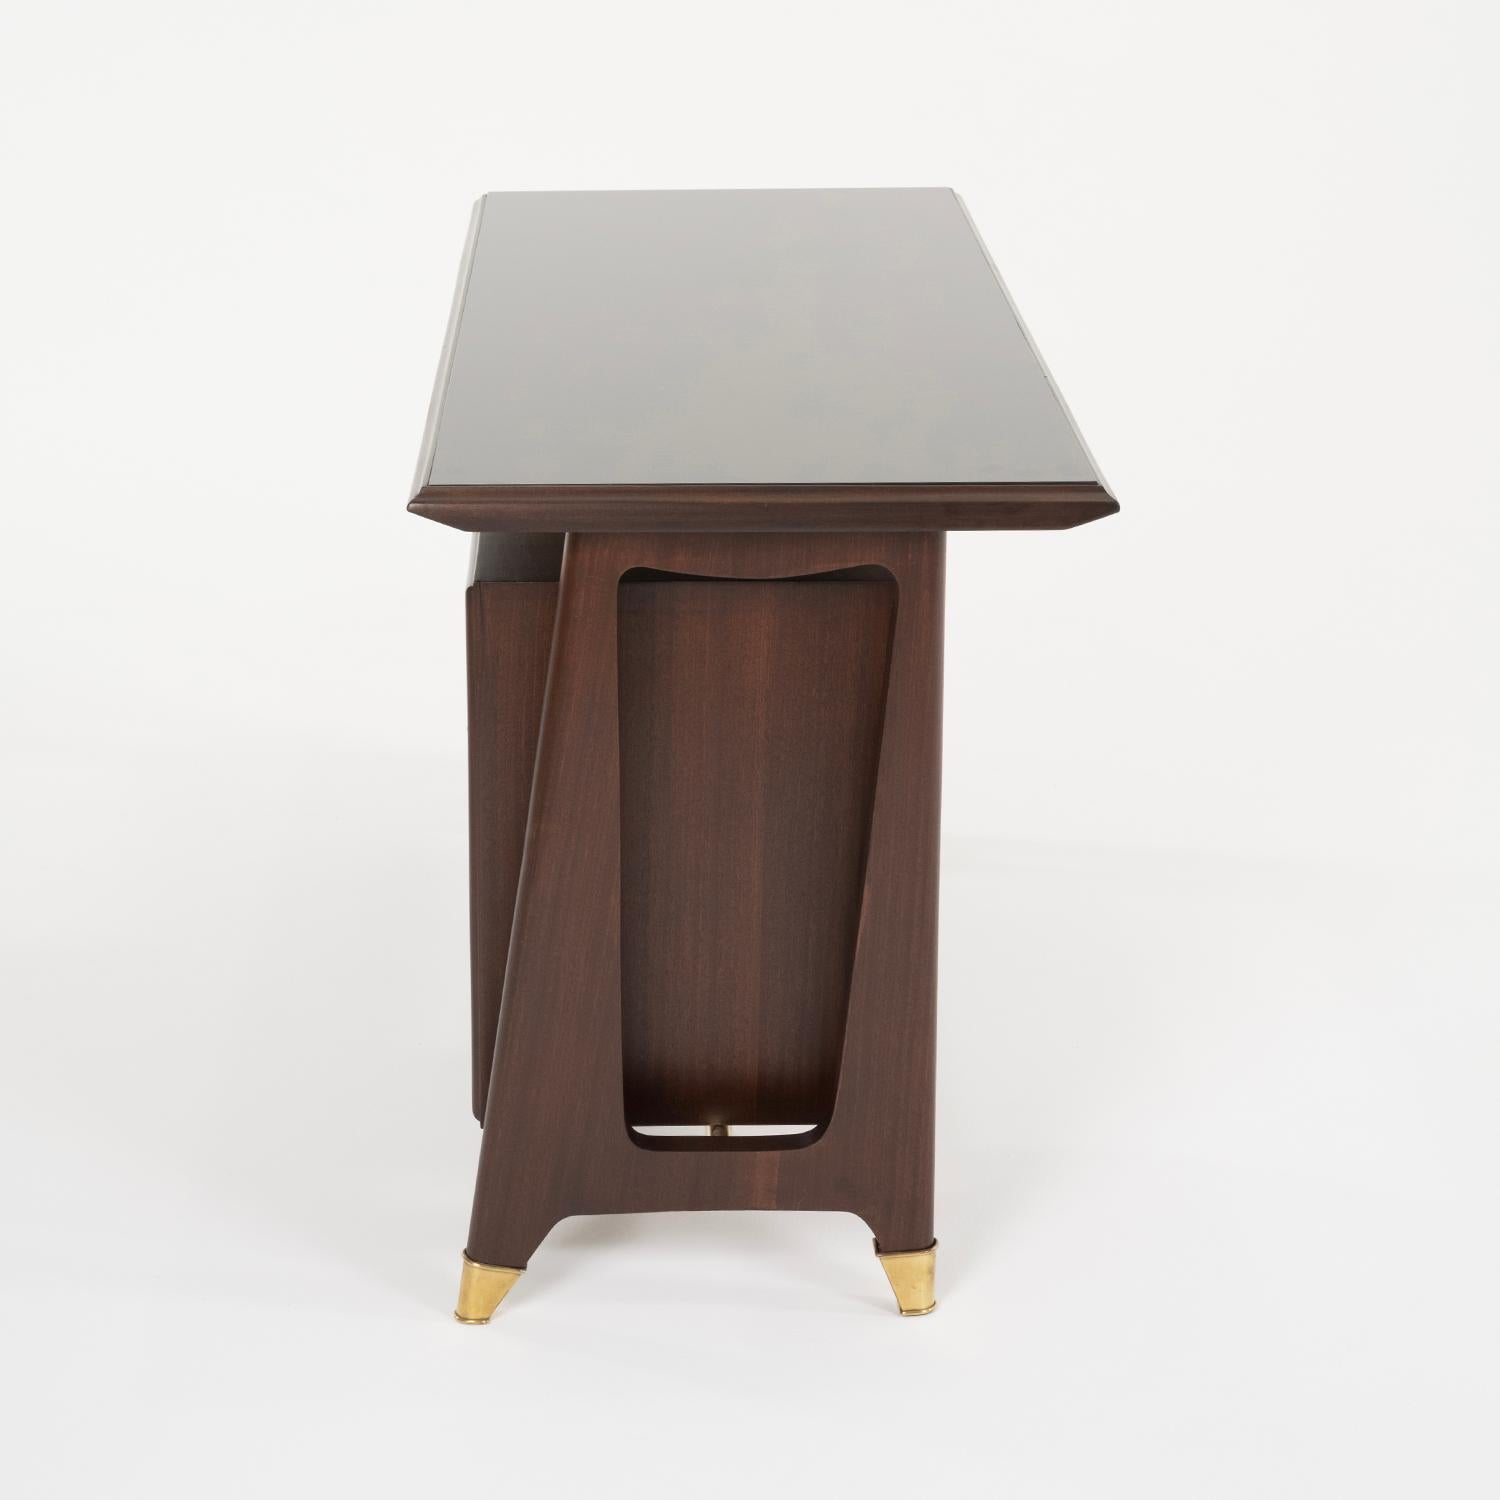 20th Century Italian Vintage Rosewood Writing Desk Attributed to Vittorio Dassi For Sale 2